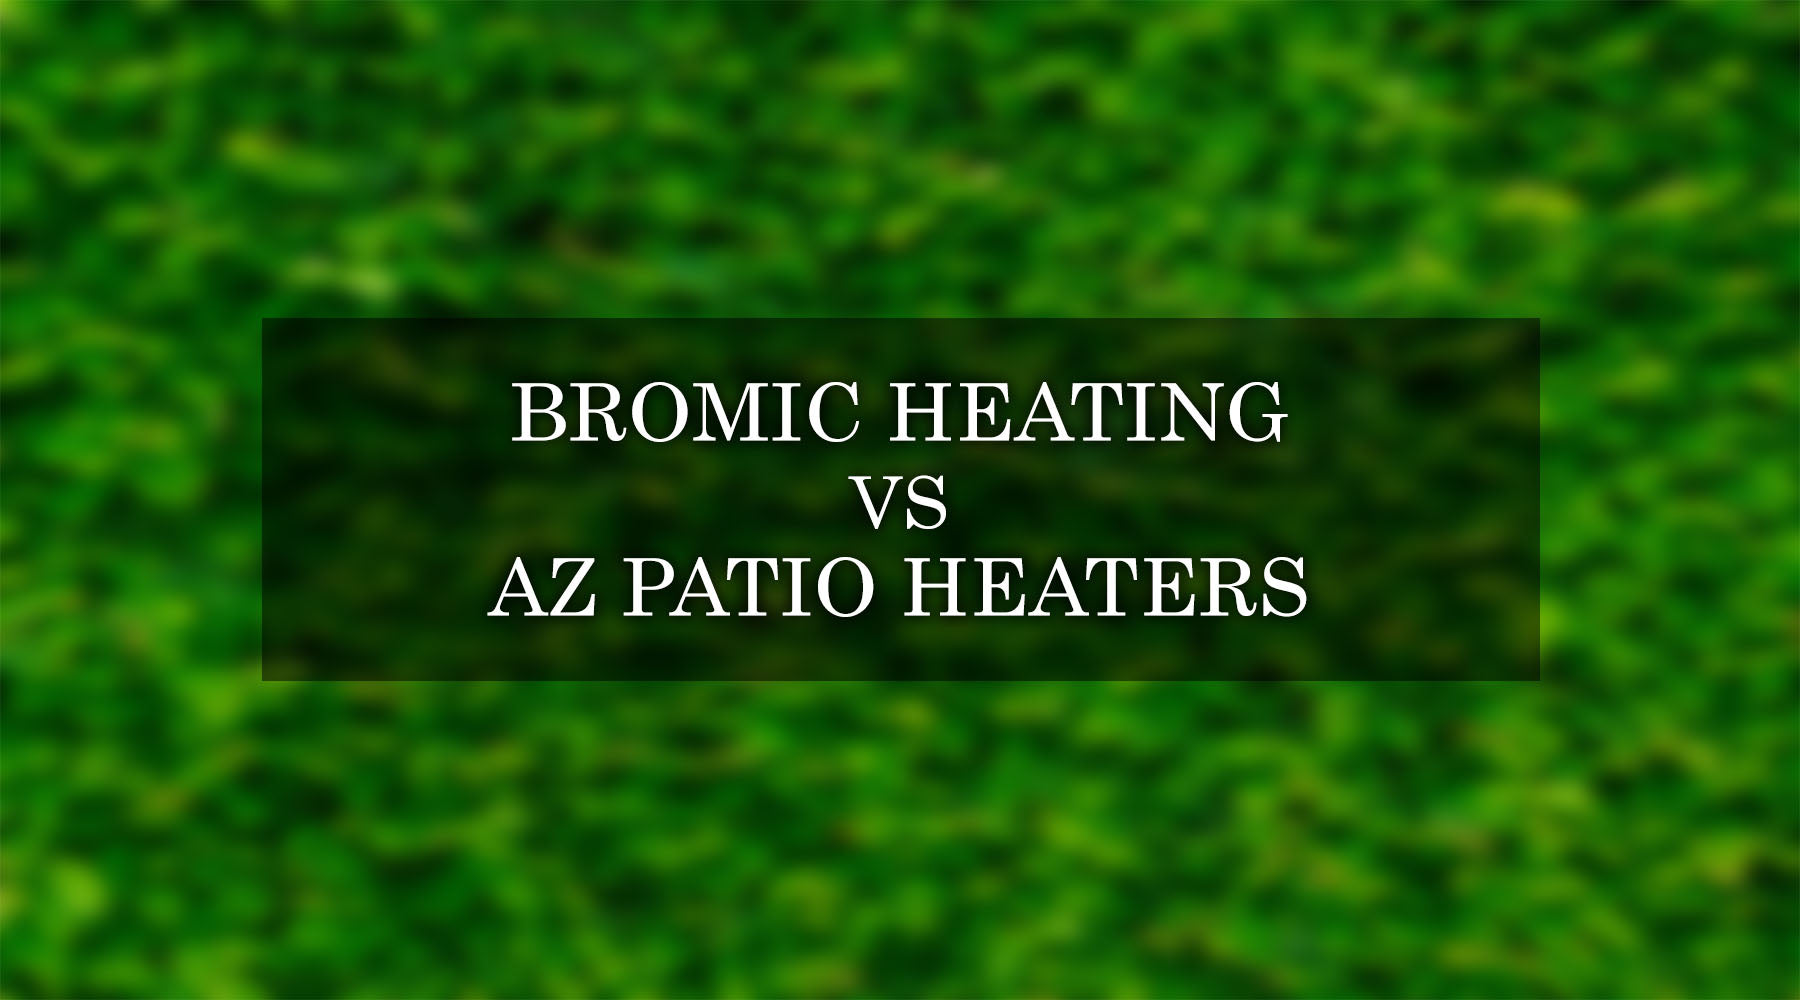 Bromic Heating vs AZ Patio Heaters: Which is the Better Brand for Outdoor Heating?